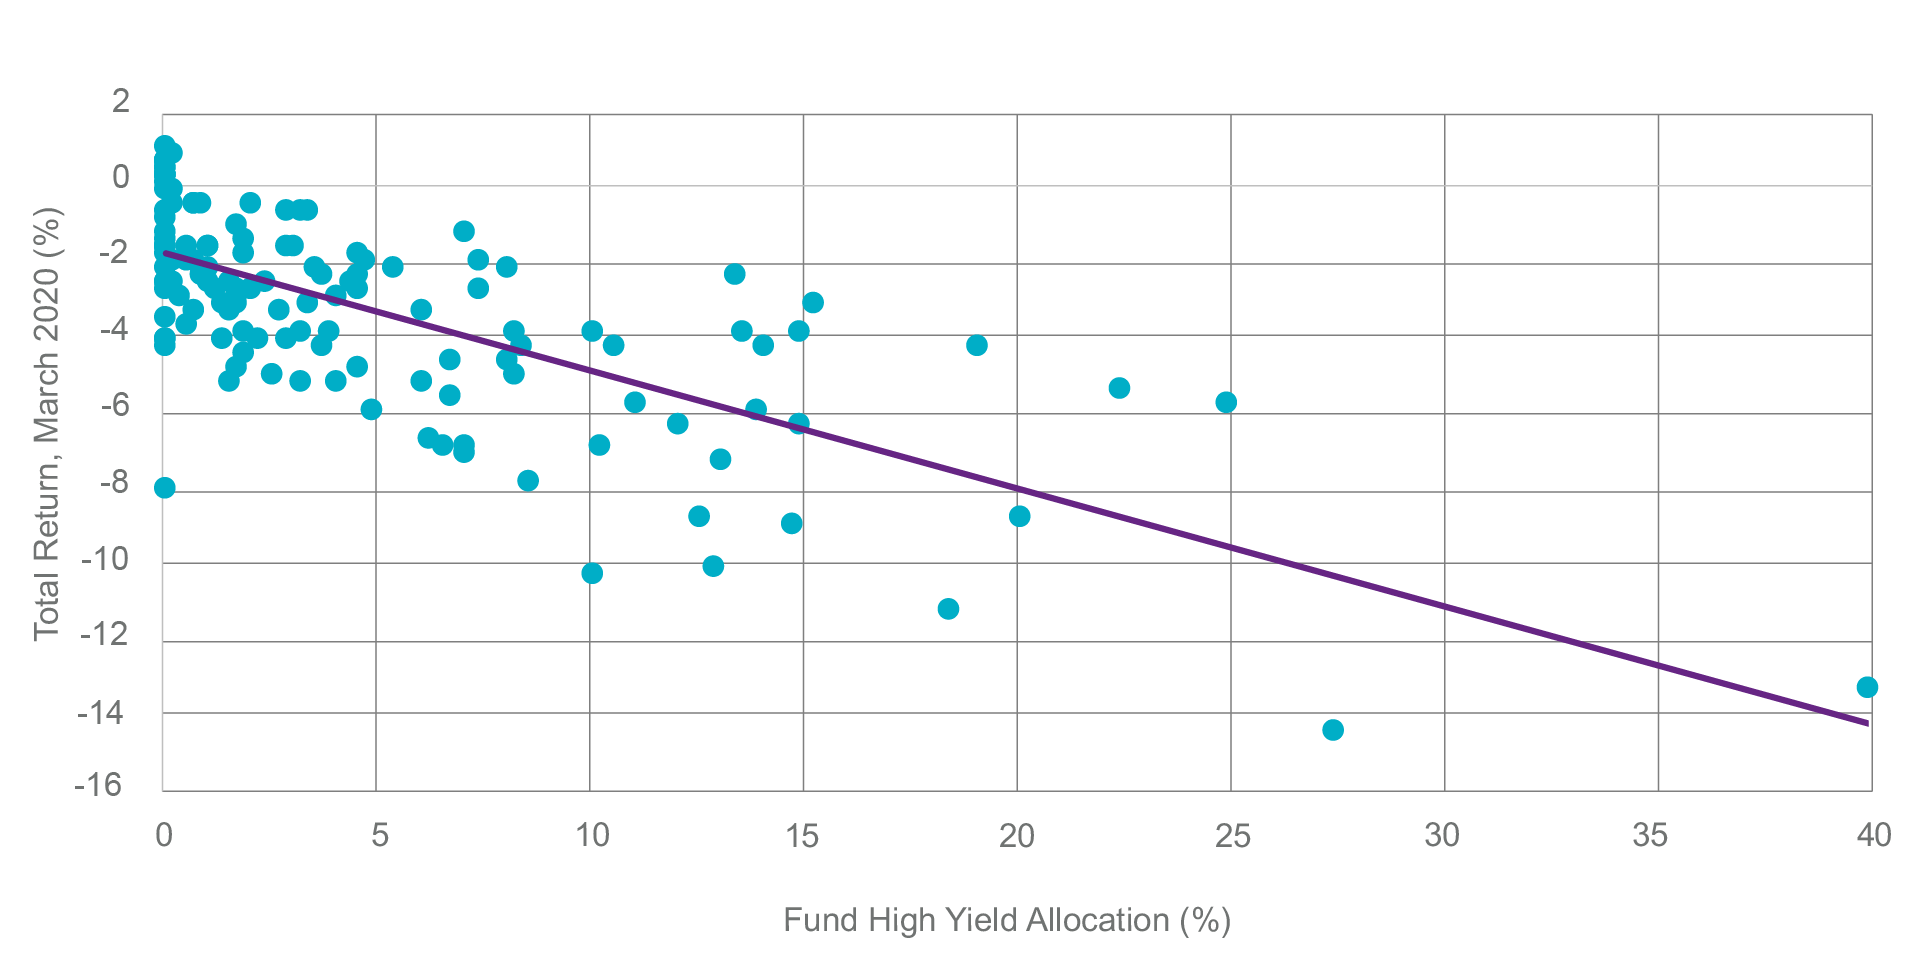 Line of best fit graph showing the total return, YTD of March 2020 in percent on the y-axis versus the fund high yield allocation in percent on the x-axis.